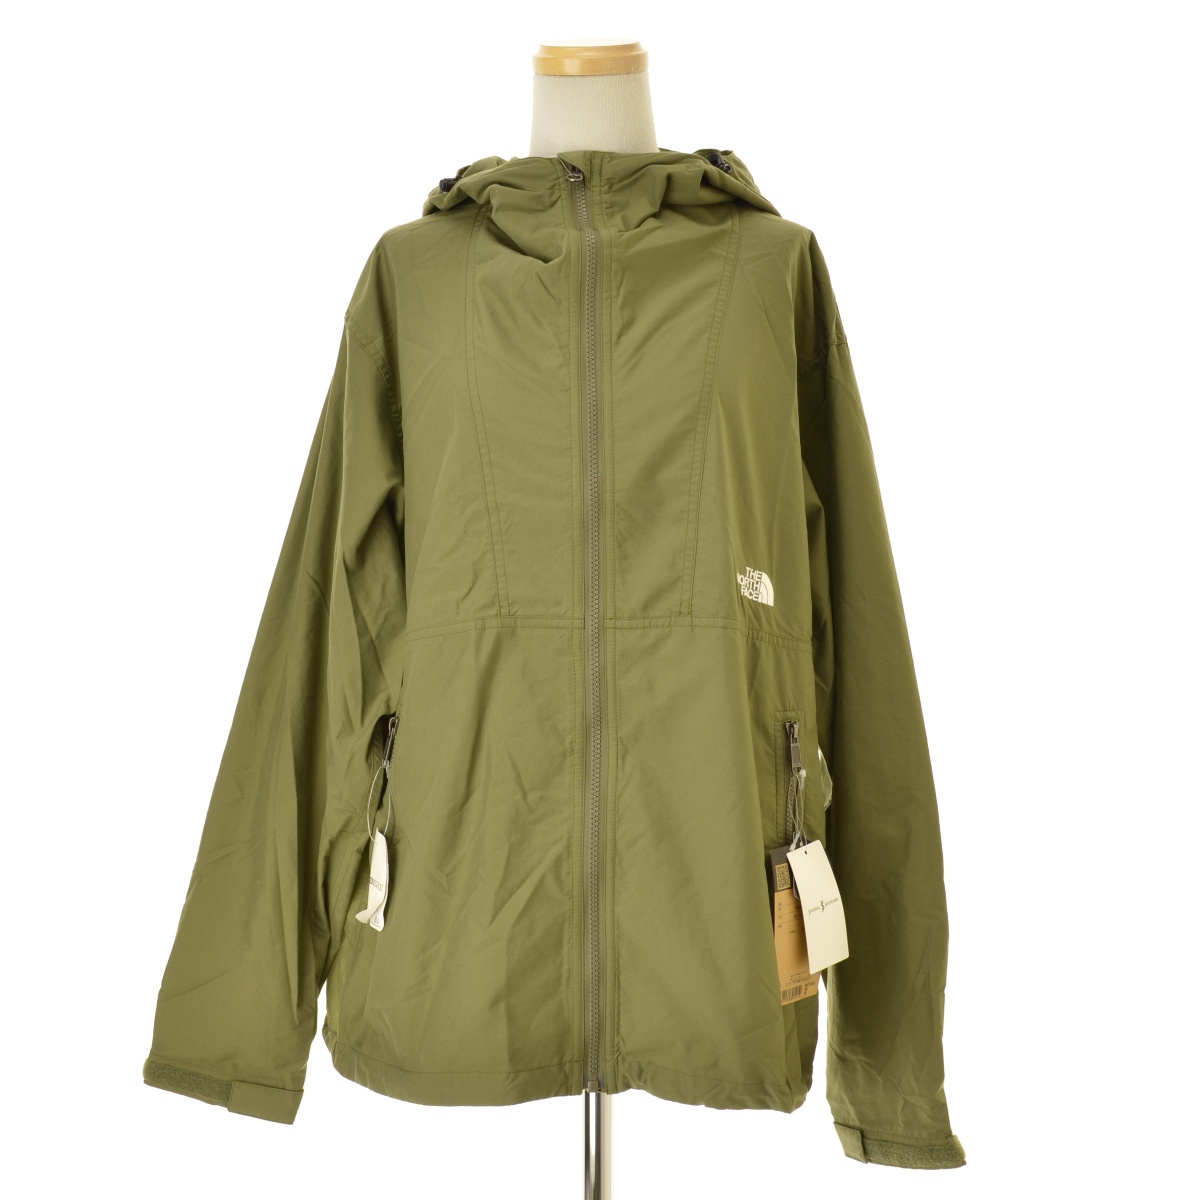 THE NORTH FACE / ΡեθNP71830 Compact Jacket ѥȥ㥱å BO Сȥ꡼֥ʥ󥸥㥱åȡרܺٲ